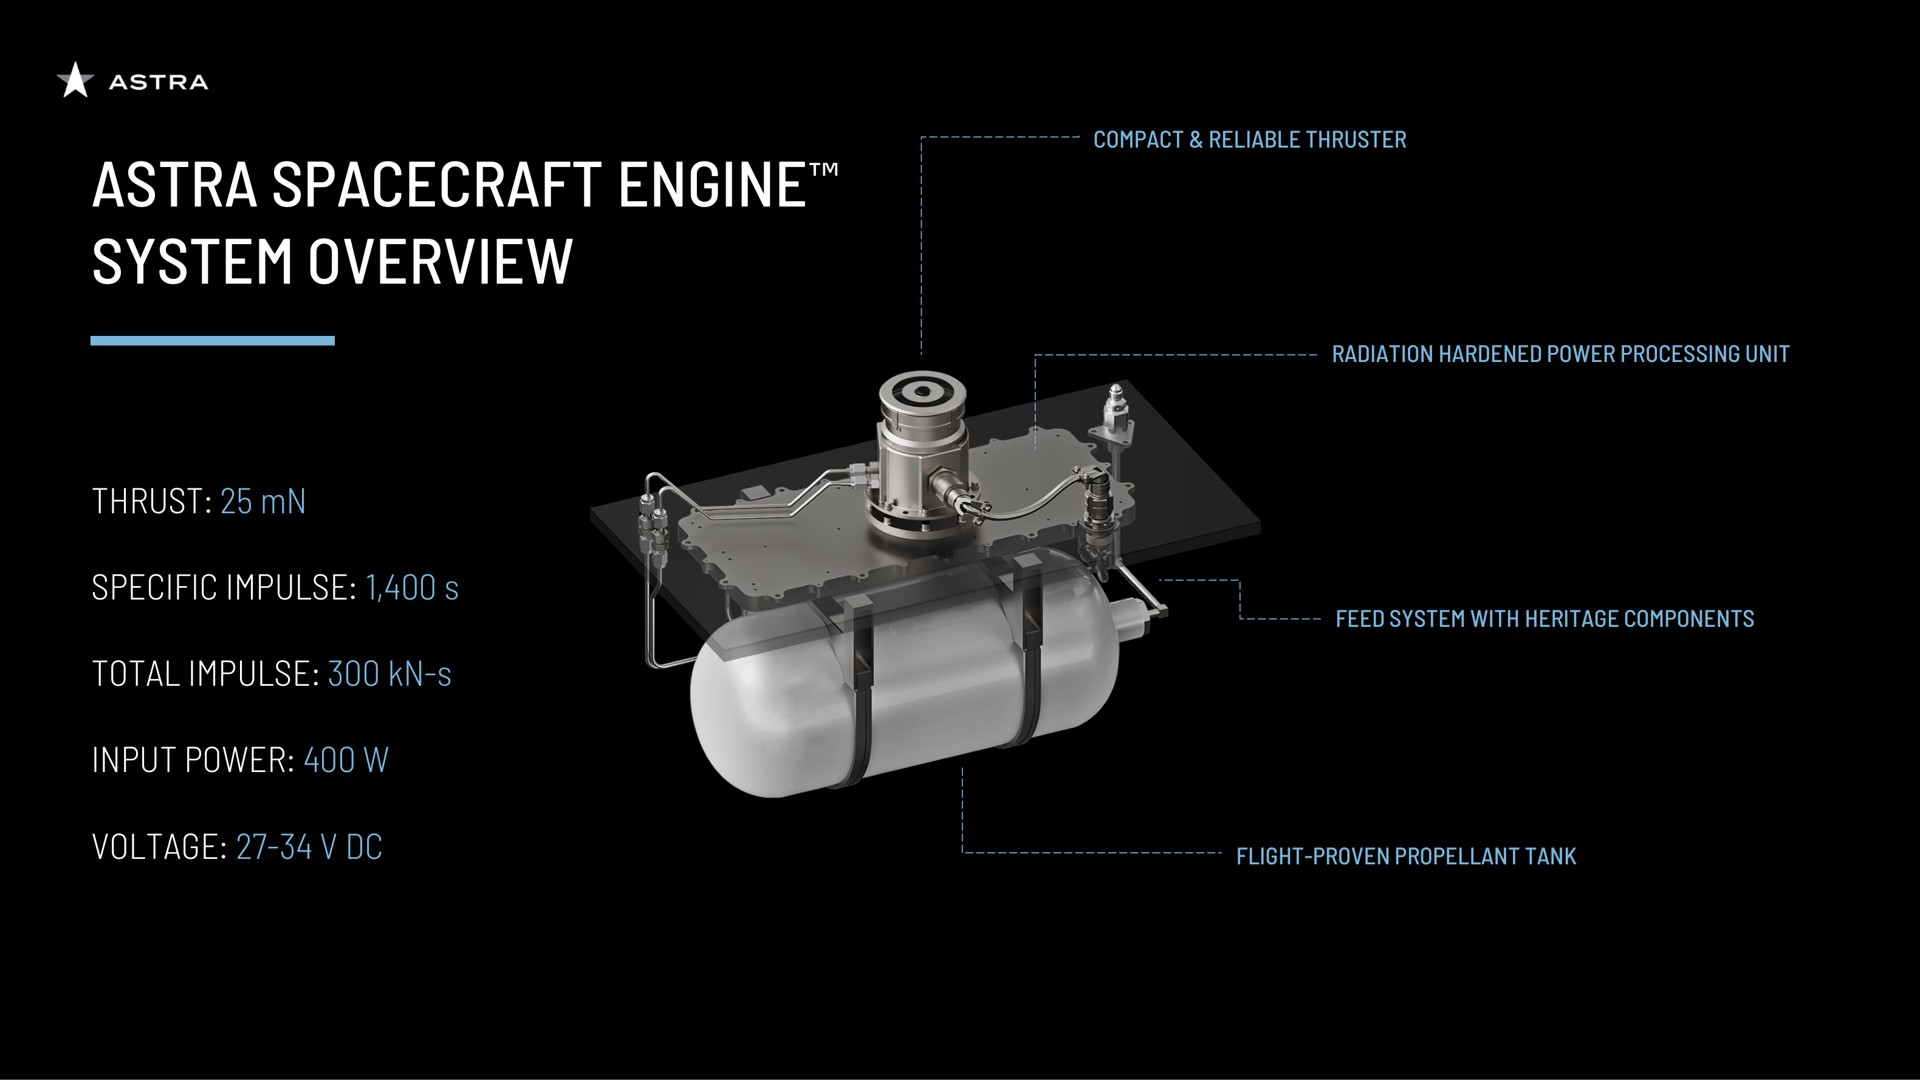 engine system overview thrust specific impulse total impulse input power a | Astra